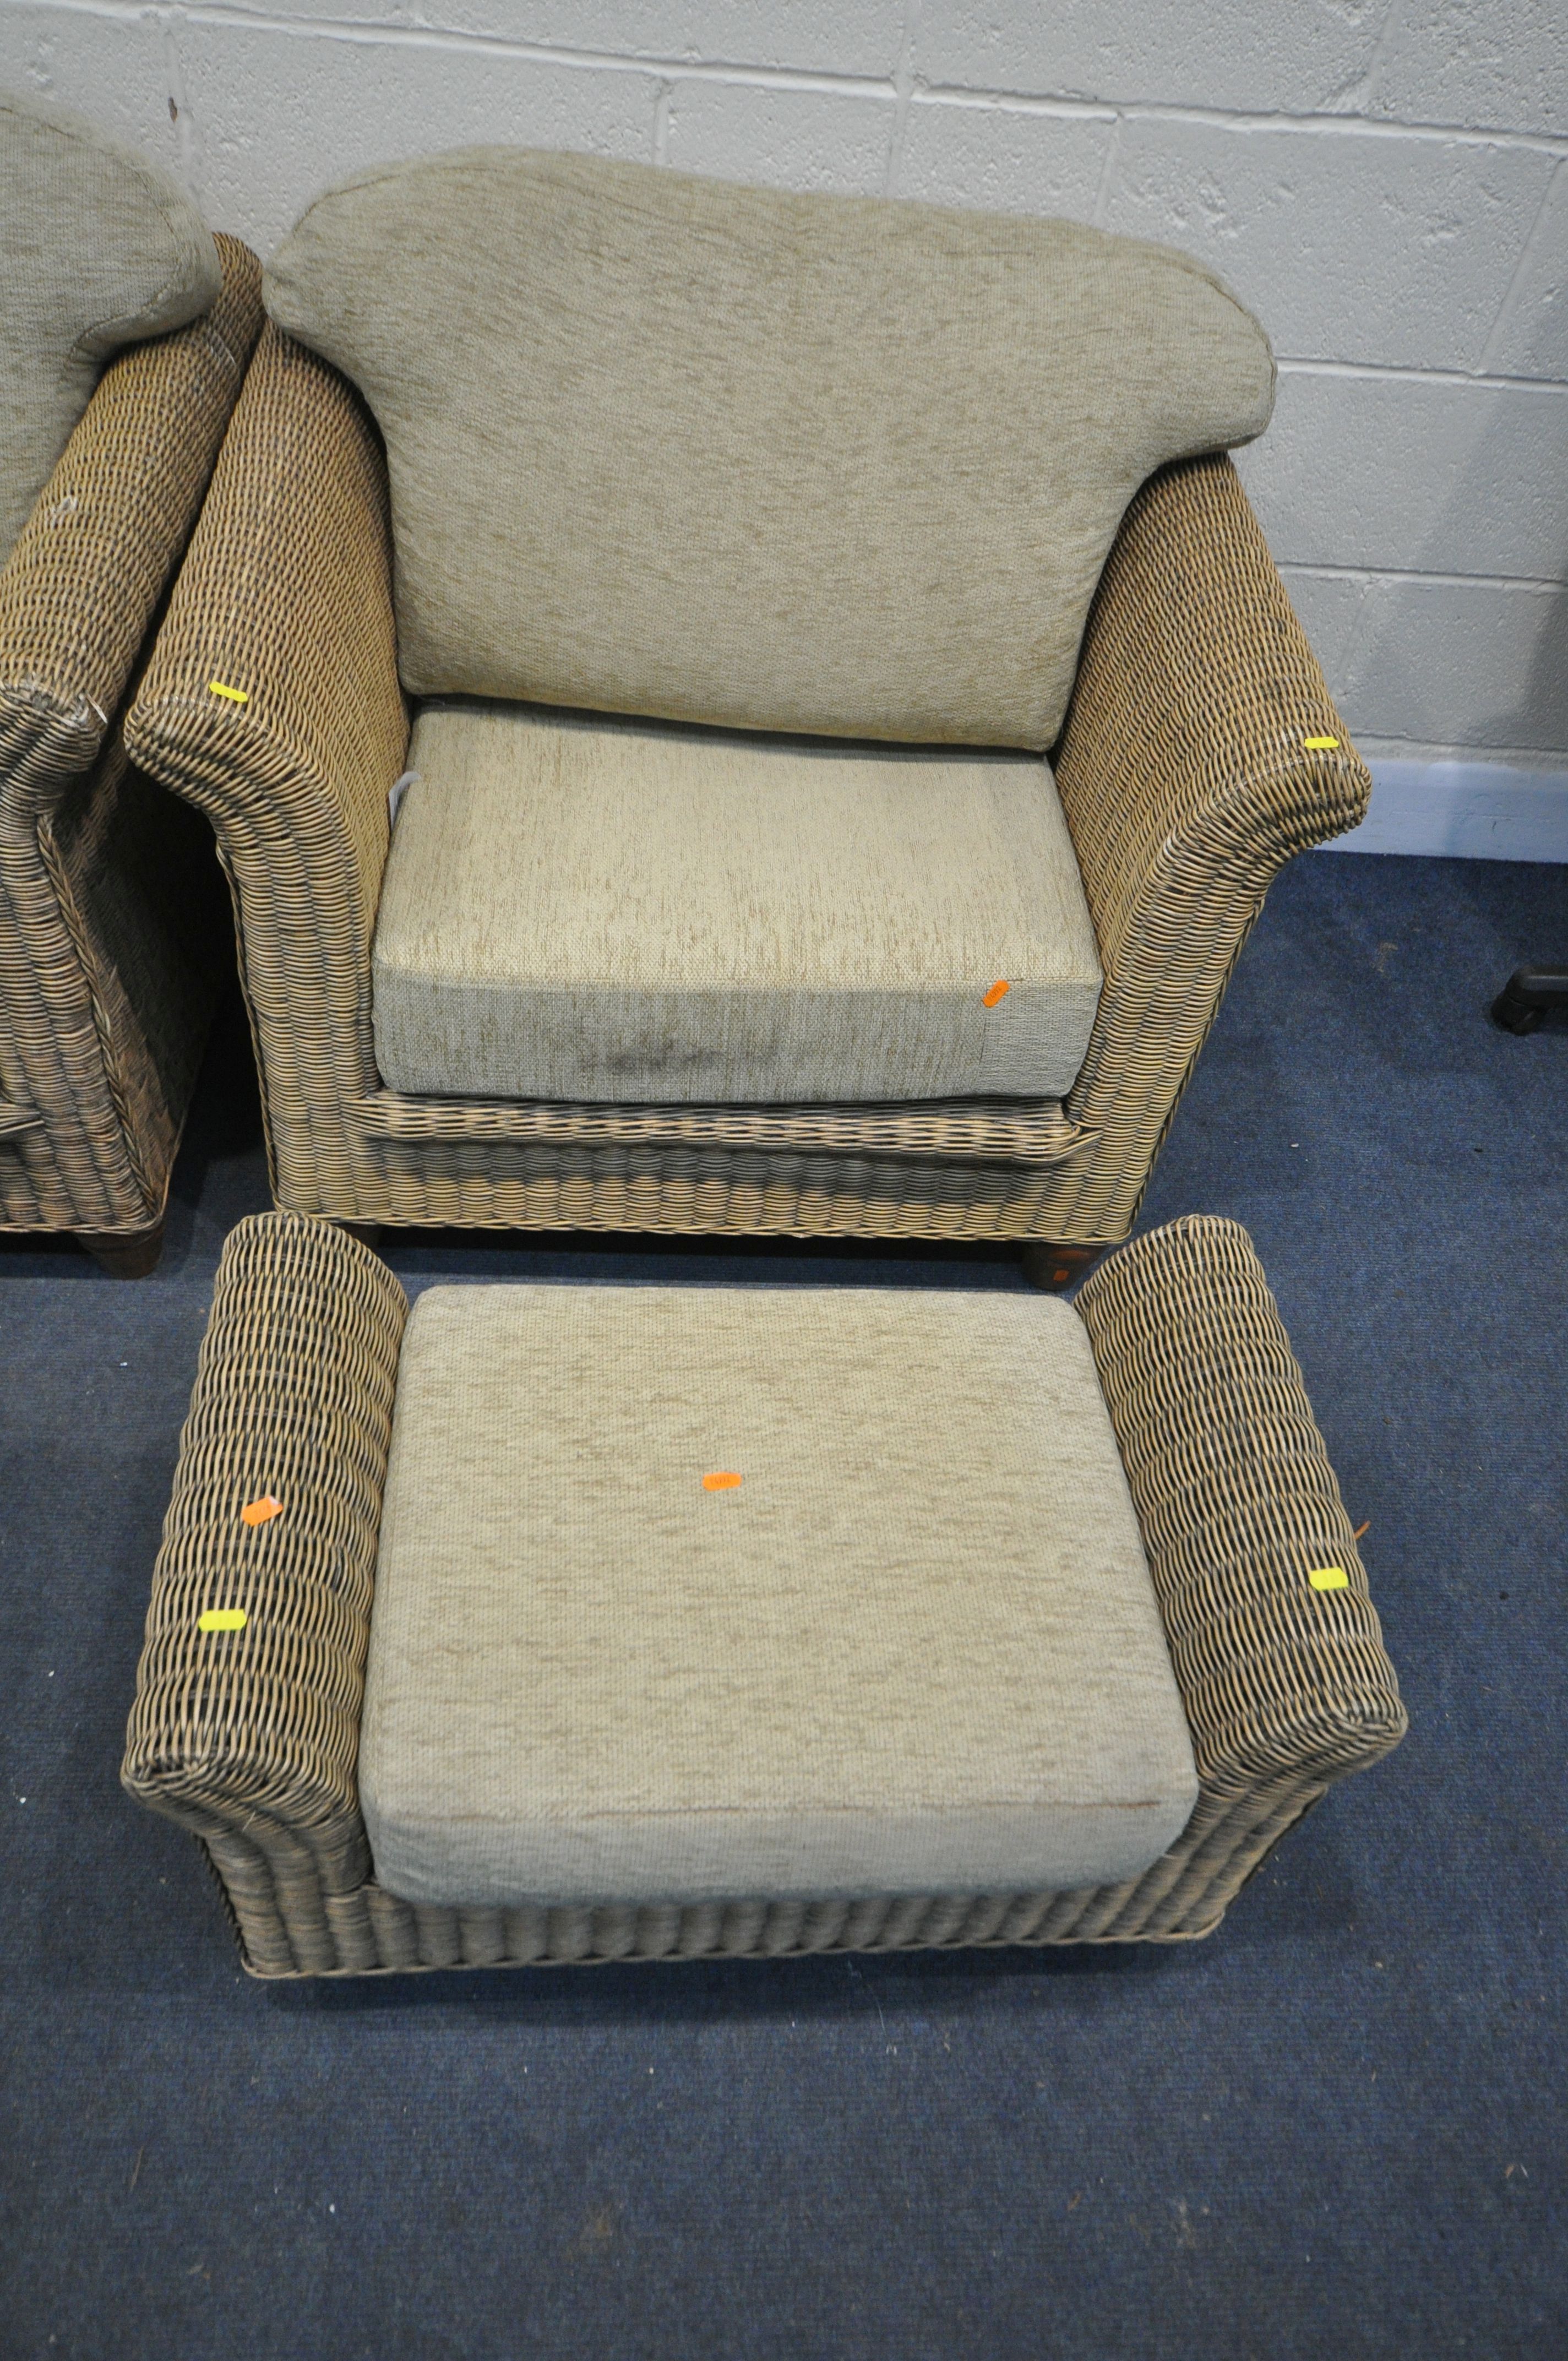 A WICKER SIX PIECE CONSERVATORY SUITE, comprising a two seater sofa, length 152cm, two armchairs, - Image 4 of 5